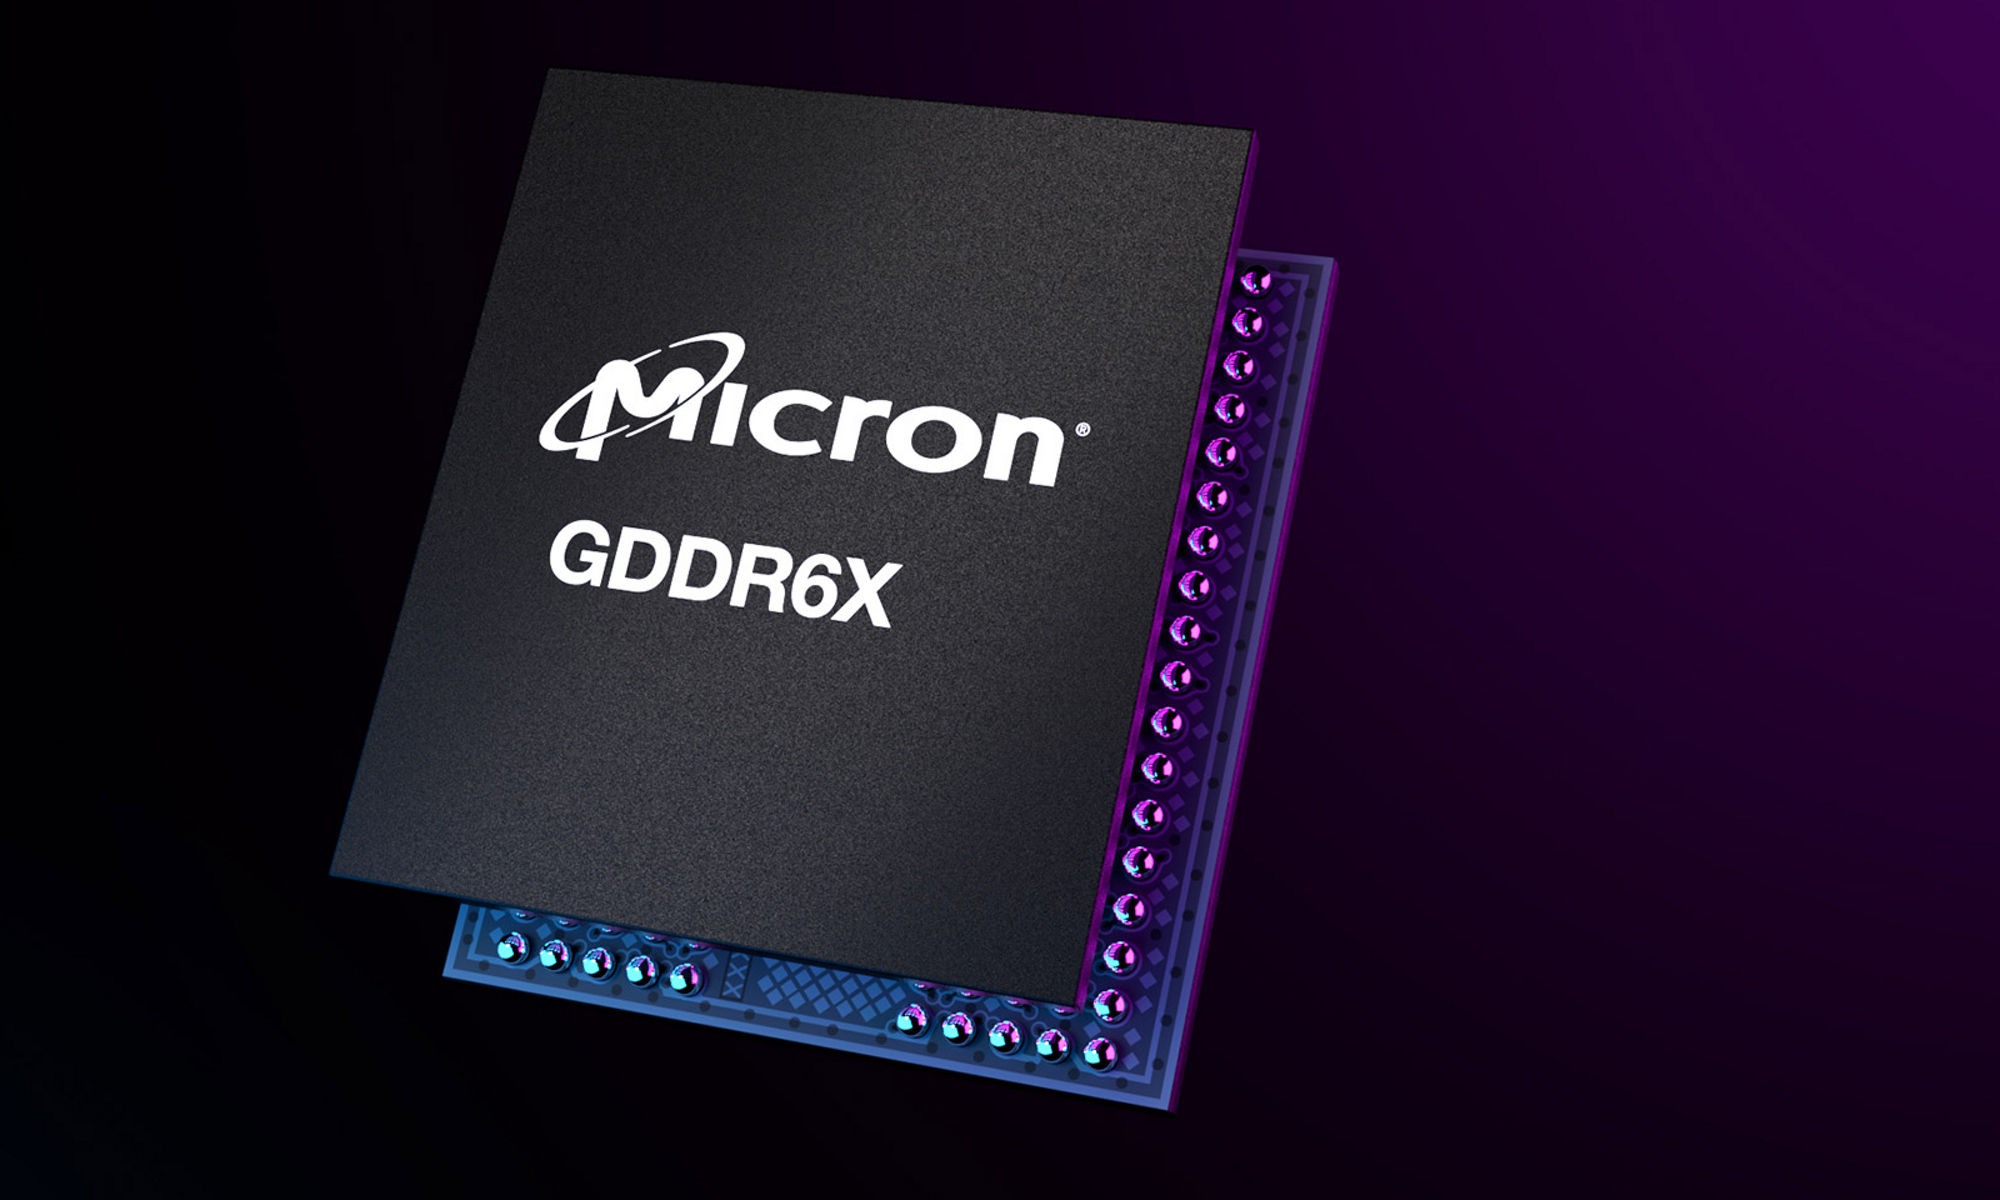 Product shot of Micron GDDr6X product